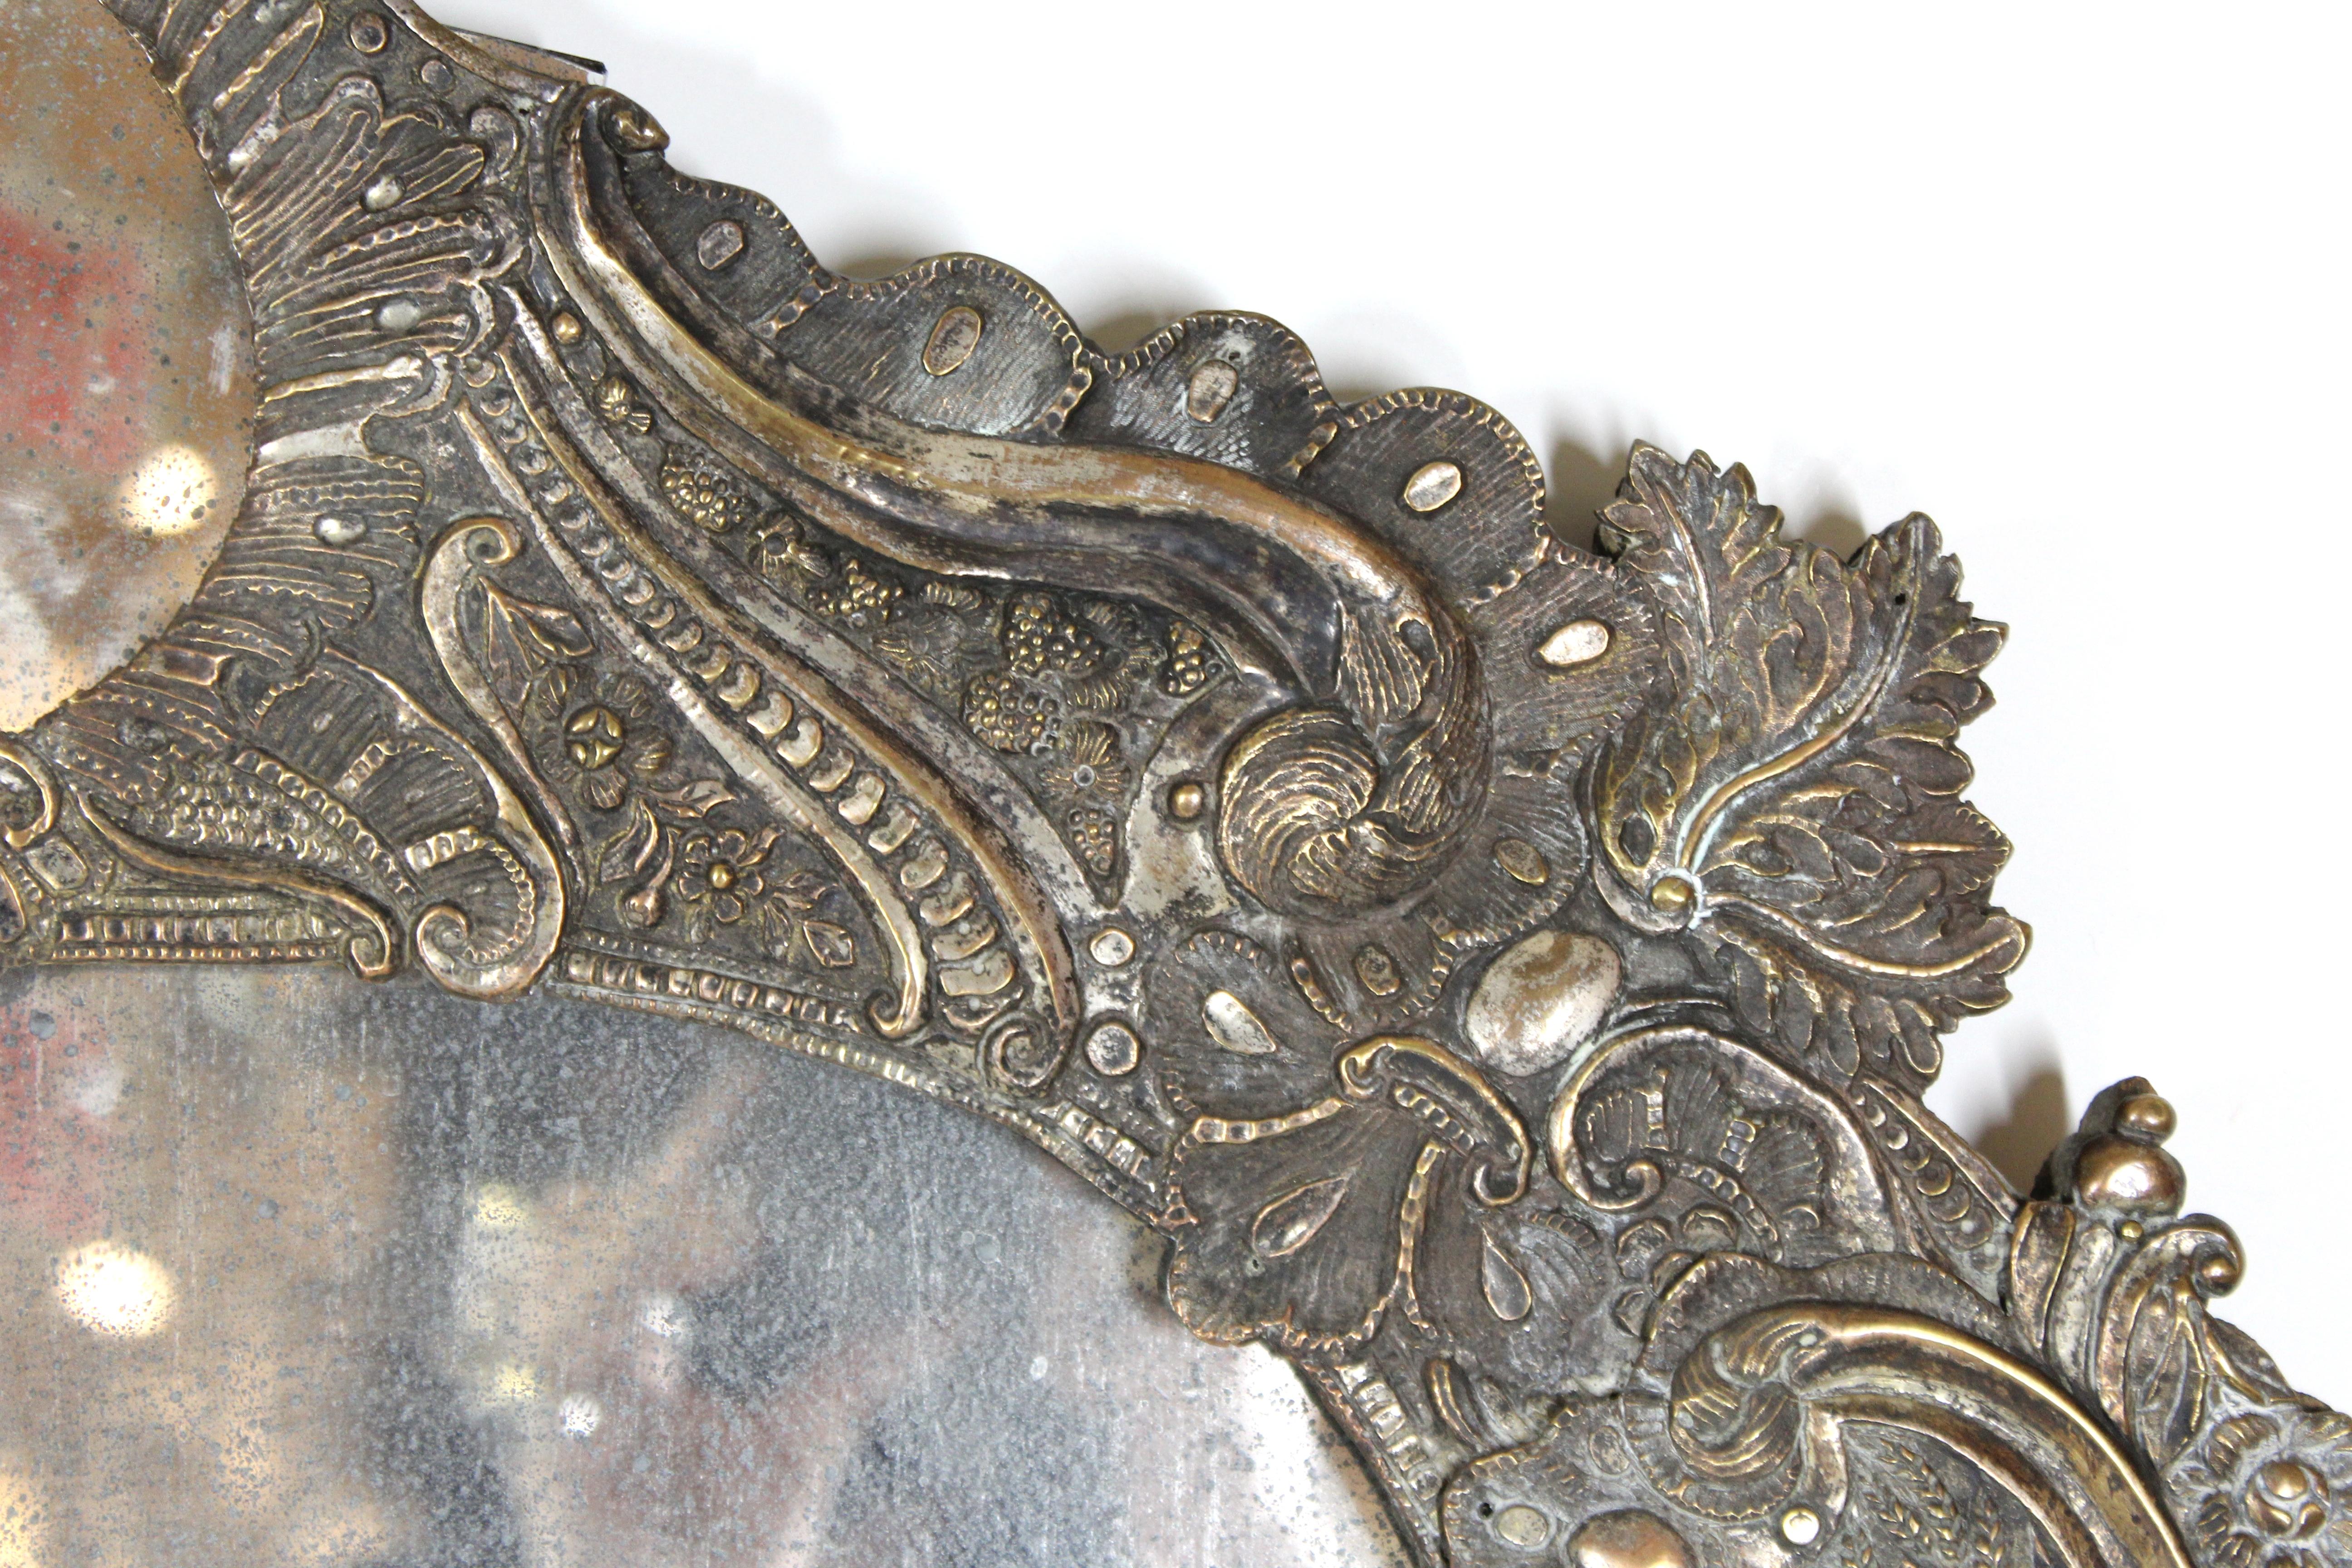 Spanish colonial Baroque elaborate mirror frame in repoussé silver on wood frame. The piece has a vast amount of baroque volutes and scrolls ornamentation, with depiction of wheat, berries and flowers around the border. A smaller ovoid shape mirror